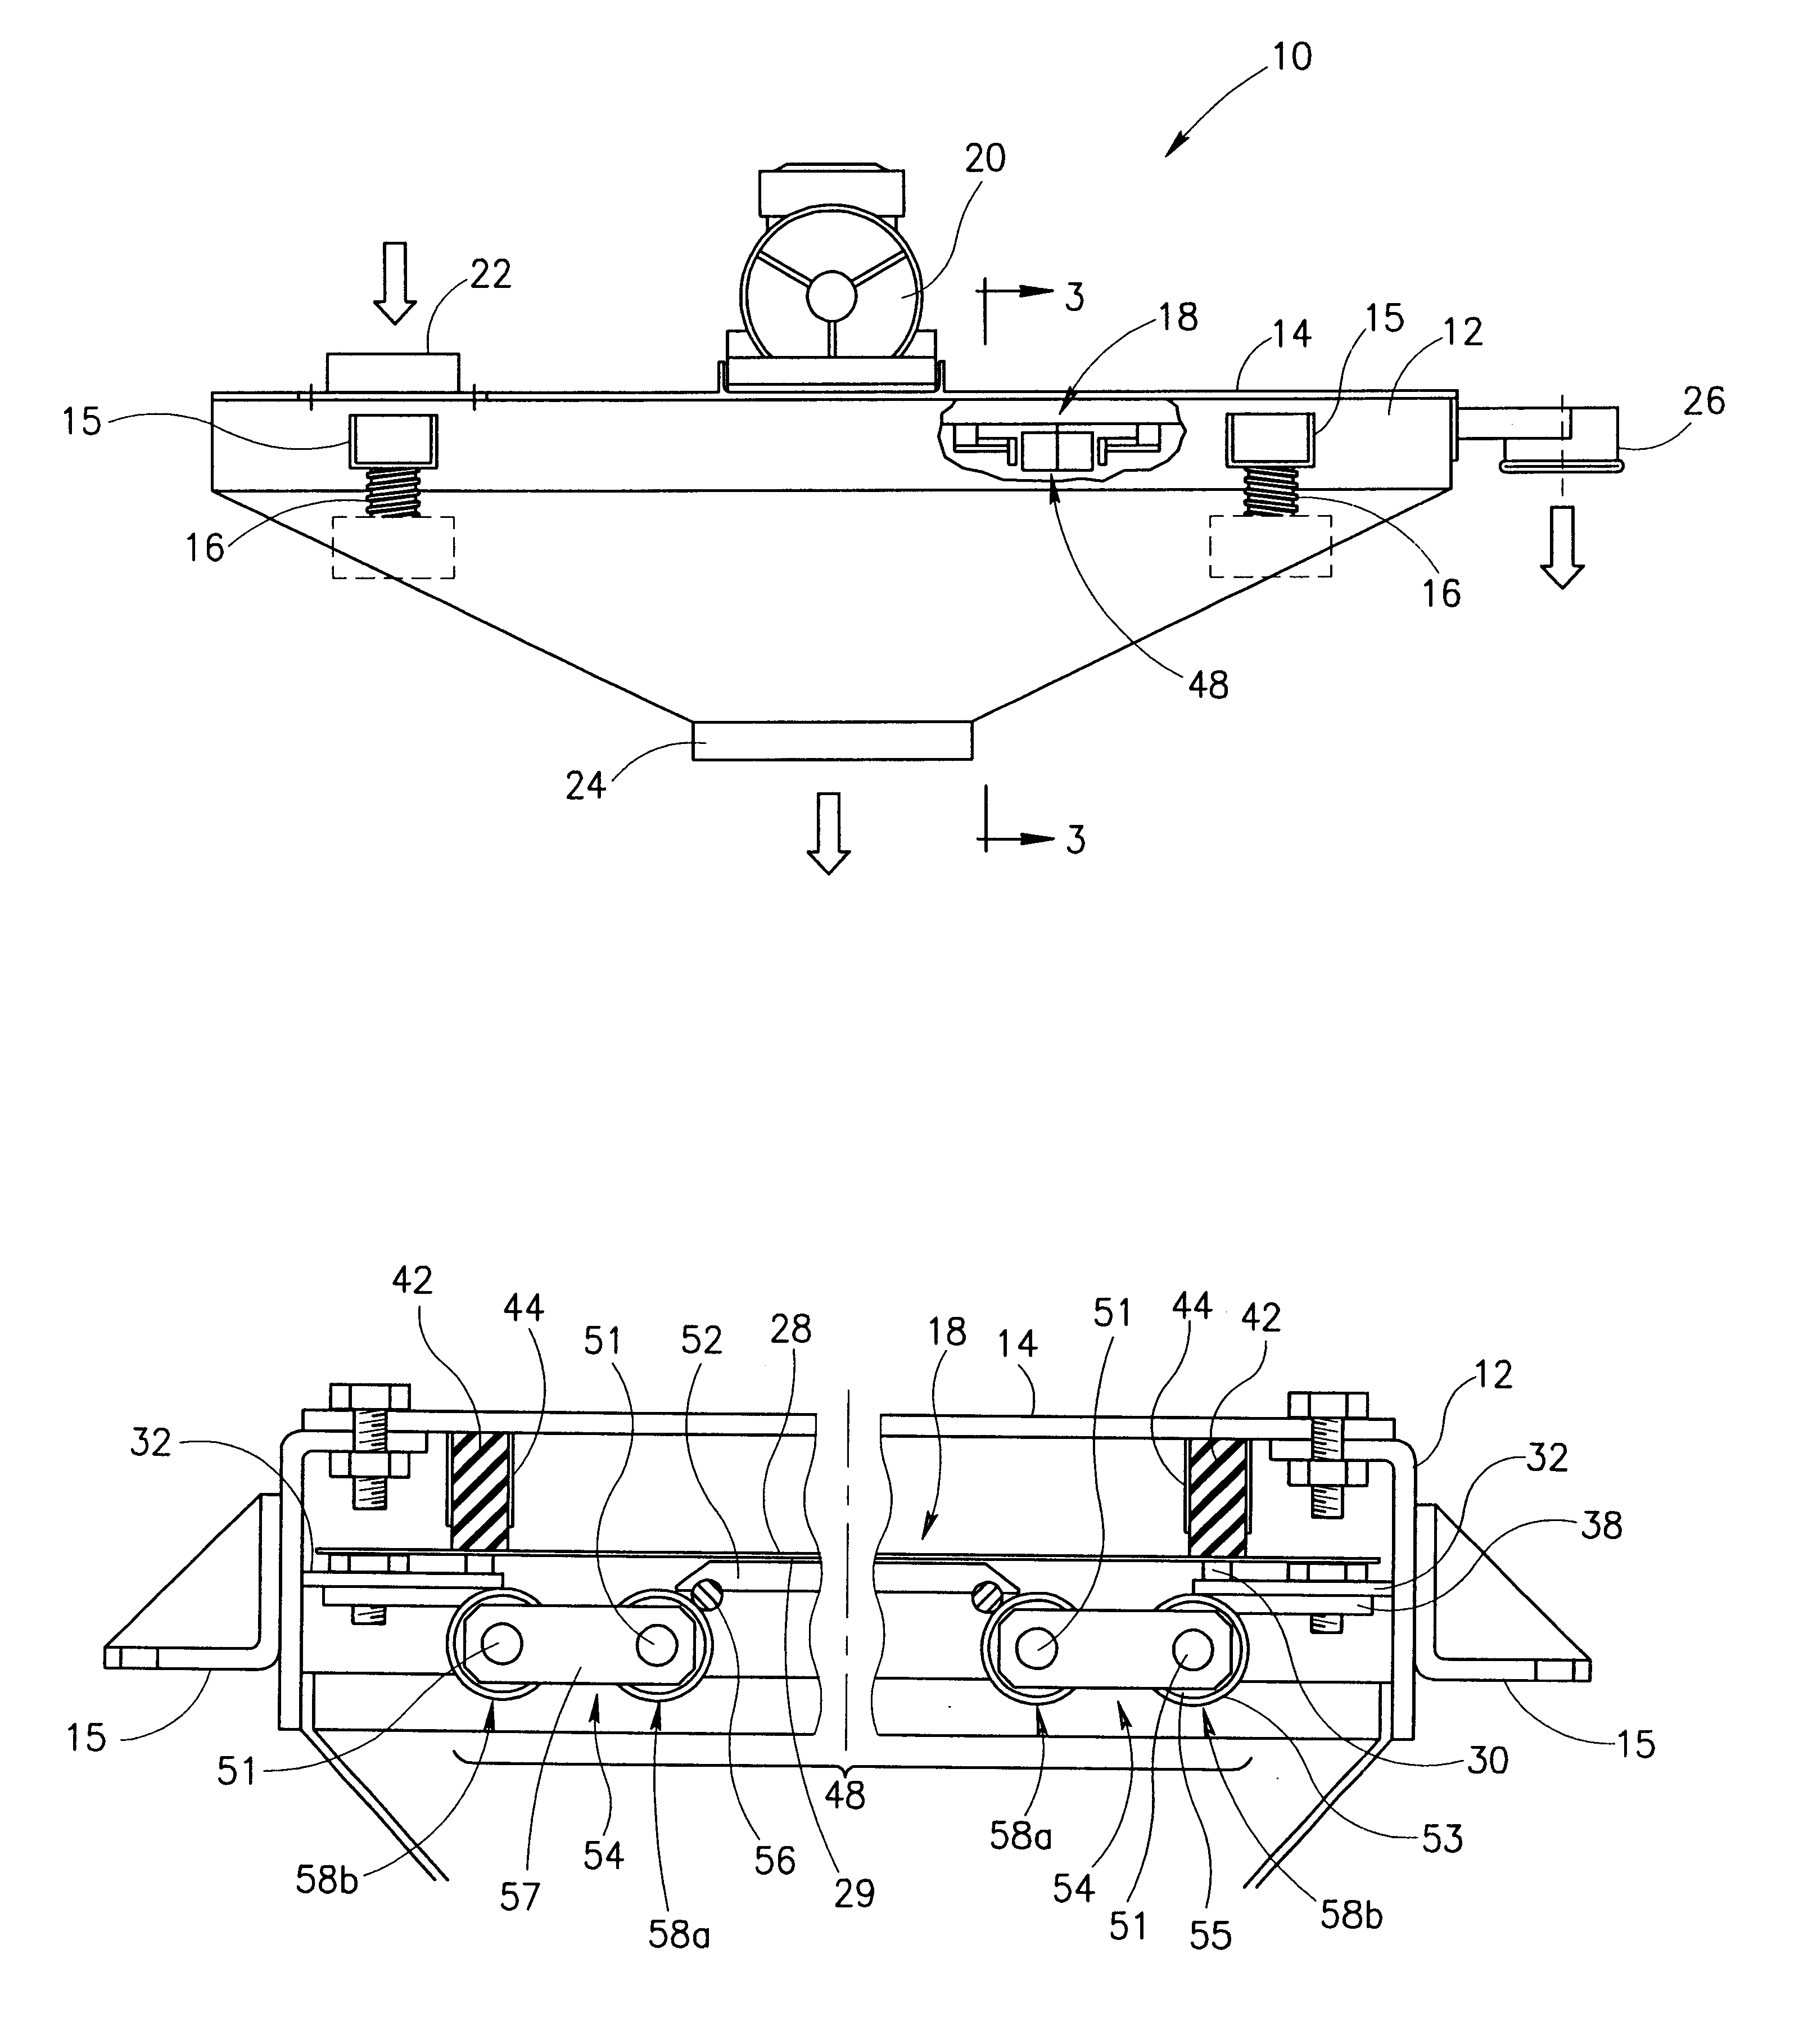 Multifrequency vibratory separator system, a vibratory separator including same, and a method of vibratory separation of solids